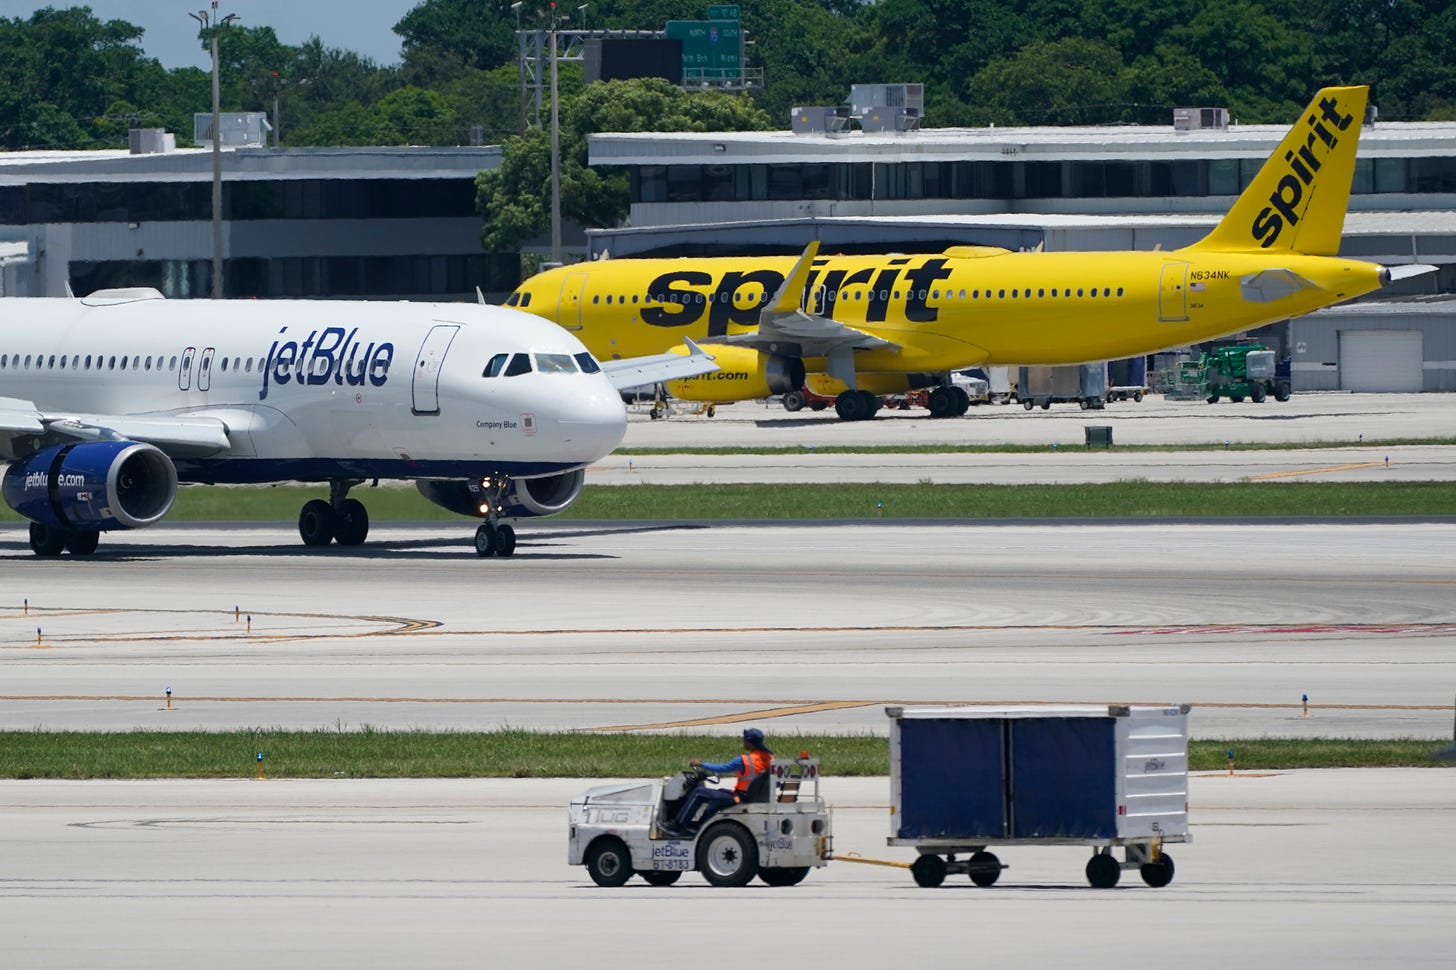 A JetBlue Airways Airbus A320, left, passes a Spirit Airlines Airbus A320 as it taxis on the runway.